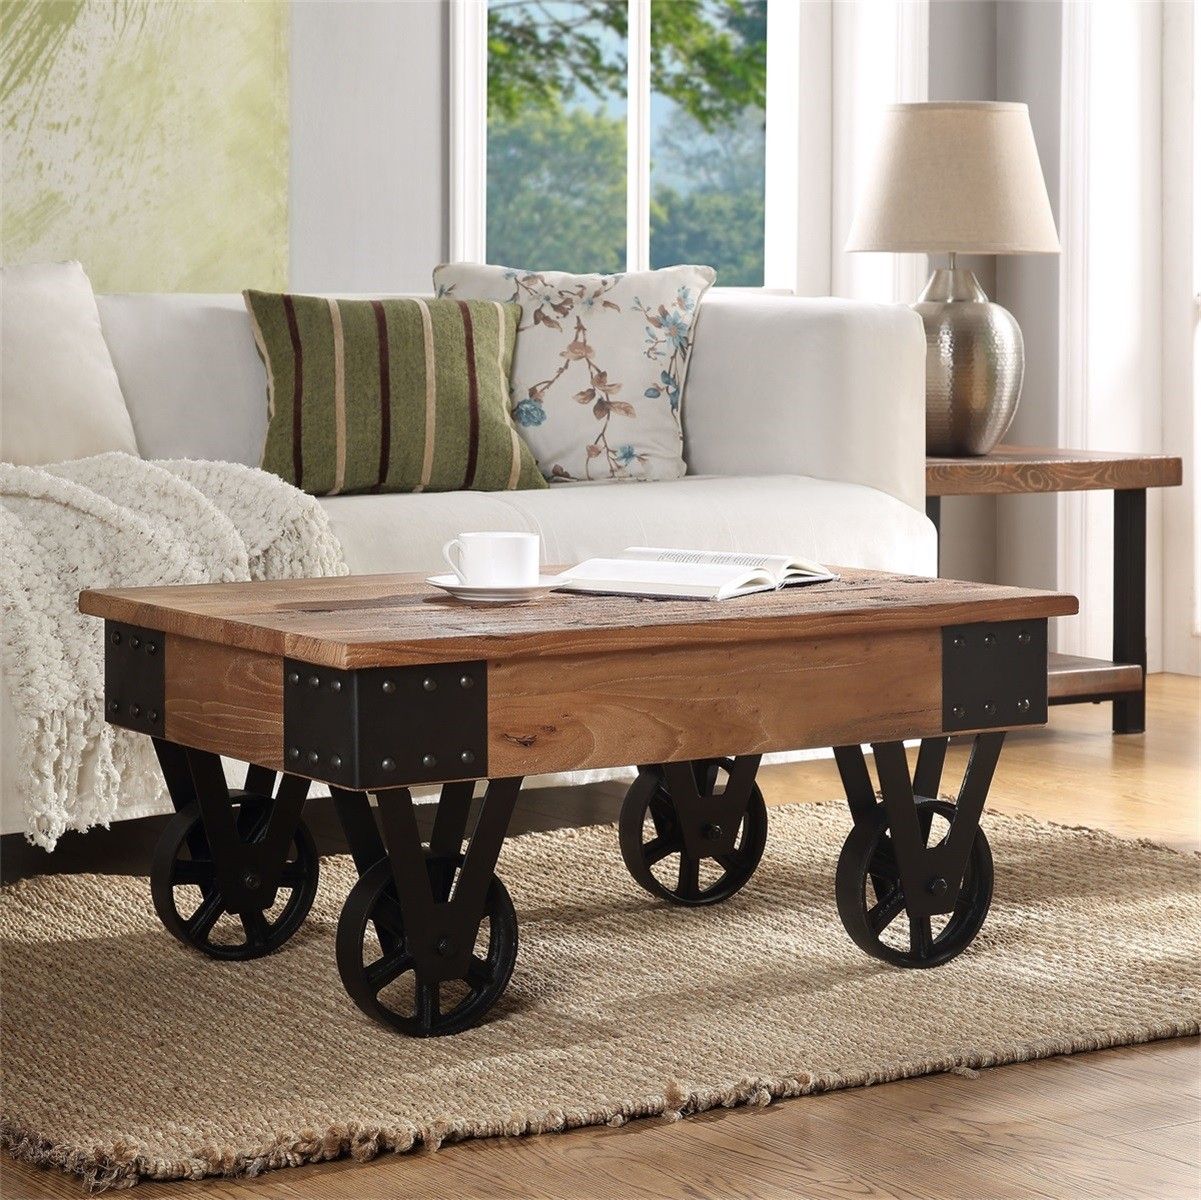 Modernluxe Farmhouse Vintage Mobile Coffee Table – Walmart In Antique White Black Coffee Tables (View 13 of 15)